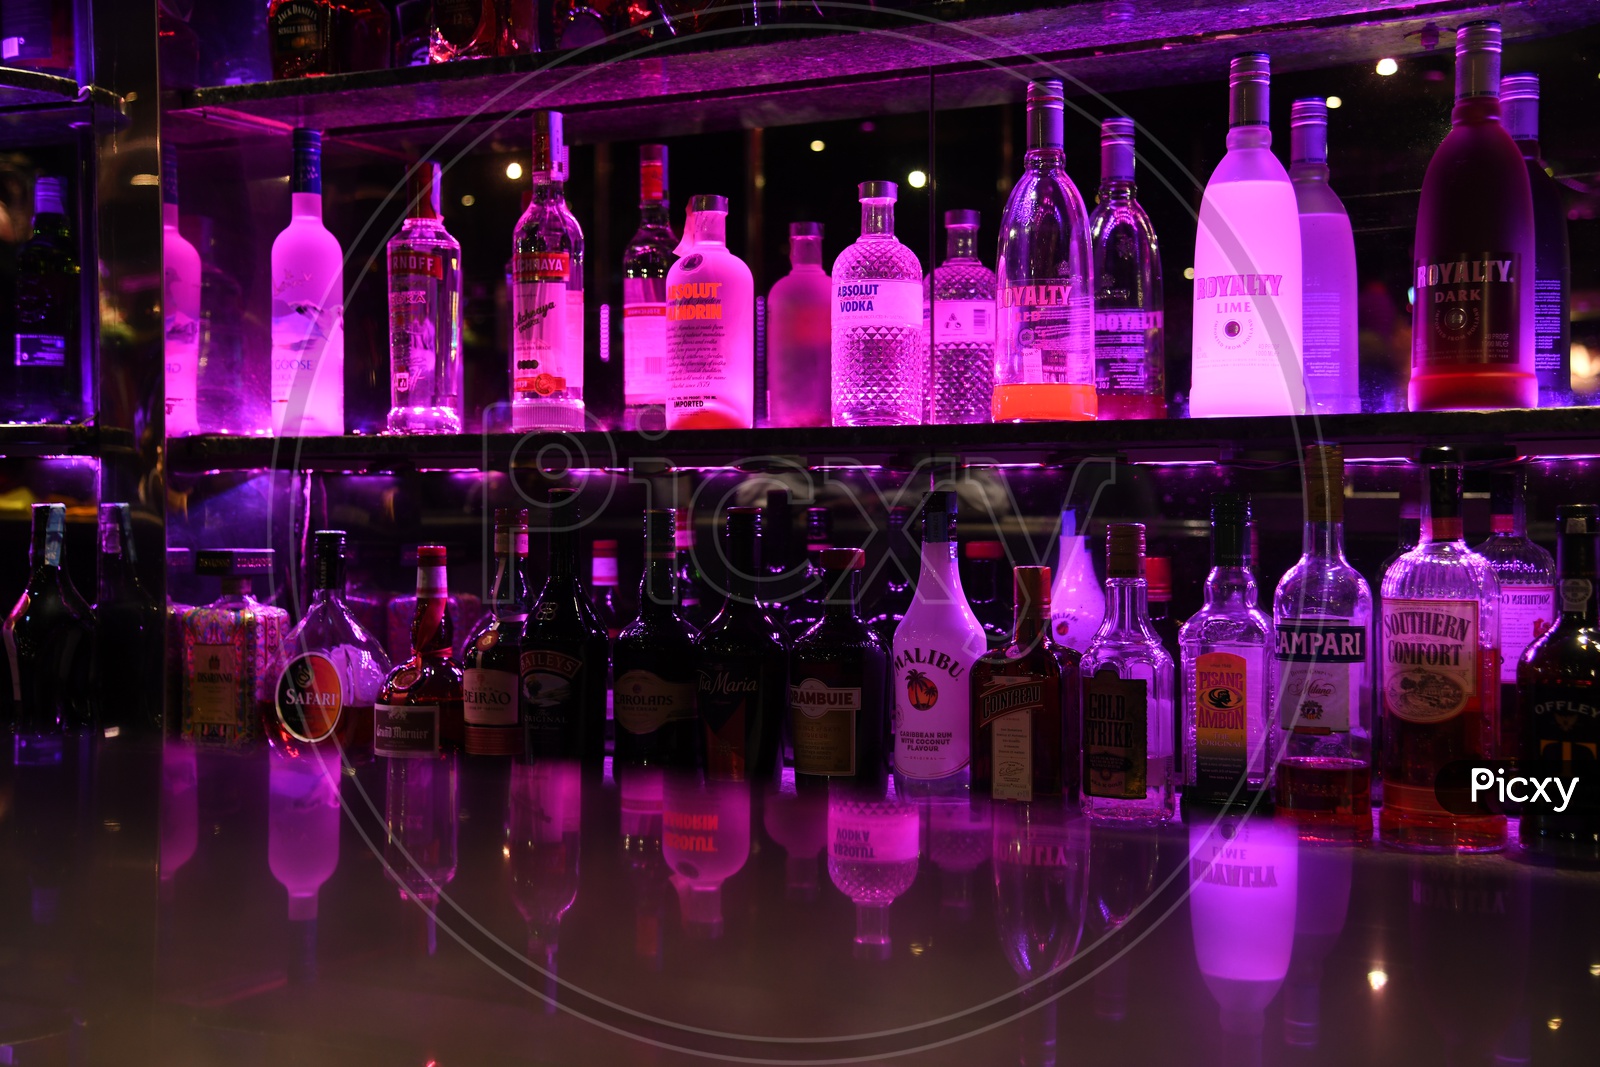 Alcohol or Wine Bottles At a Bar Counter